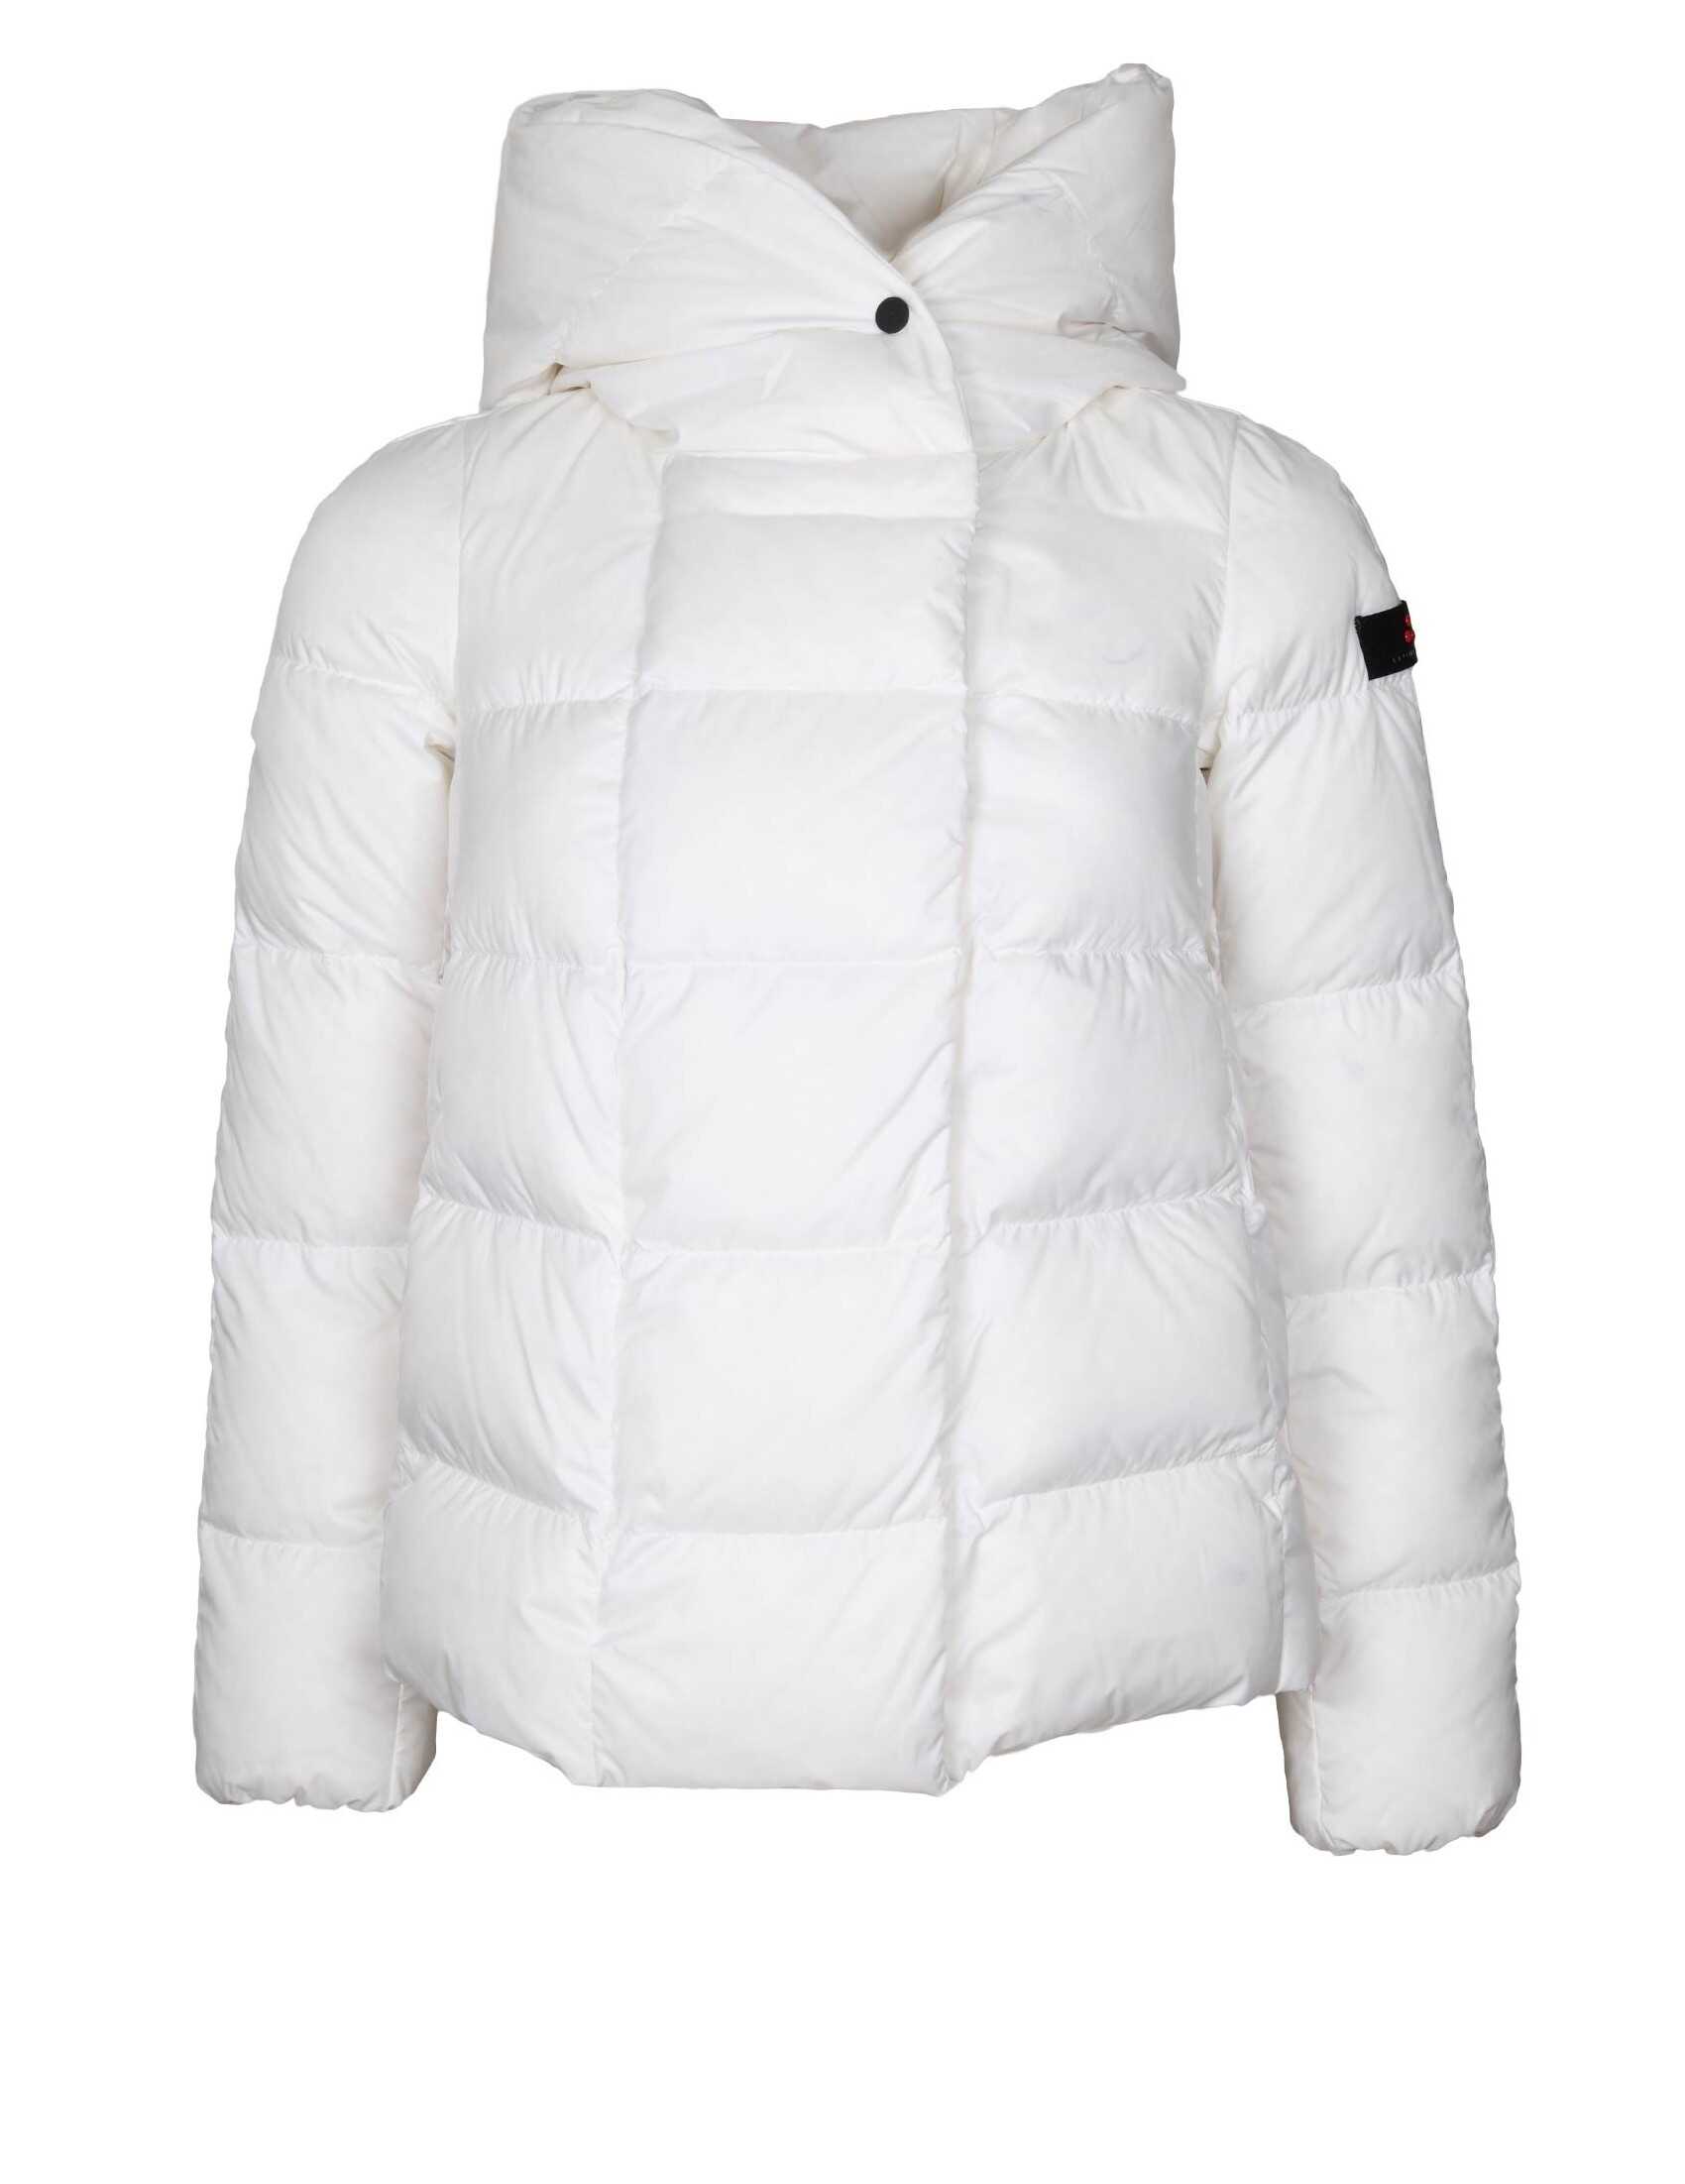 Peuterey Peuterey superlight tucano mqe down jacket in recycled fabric White